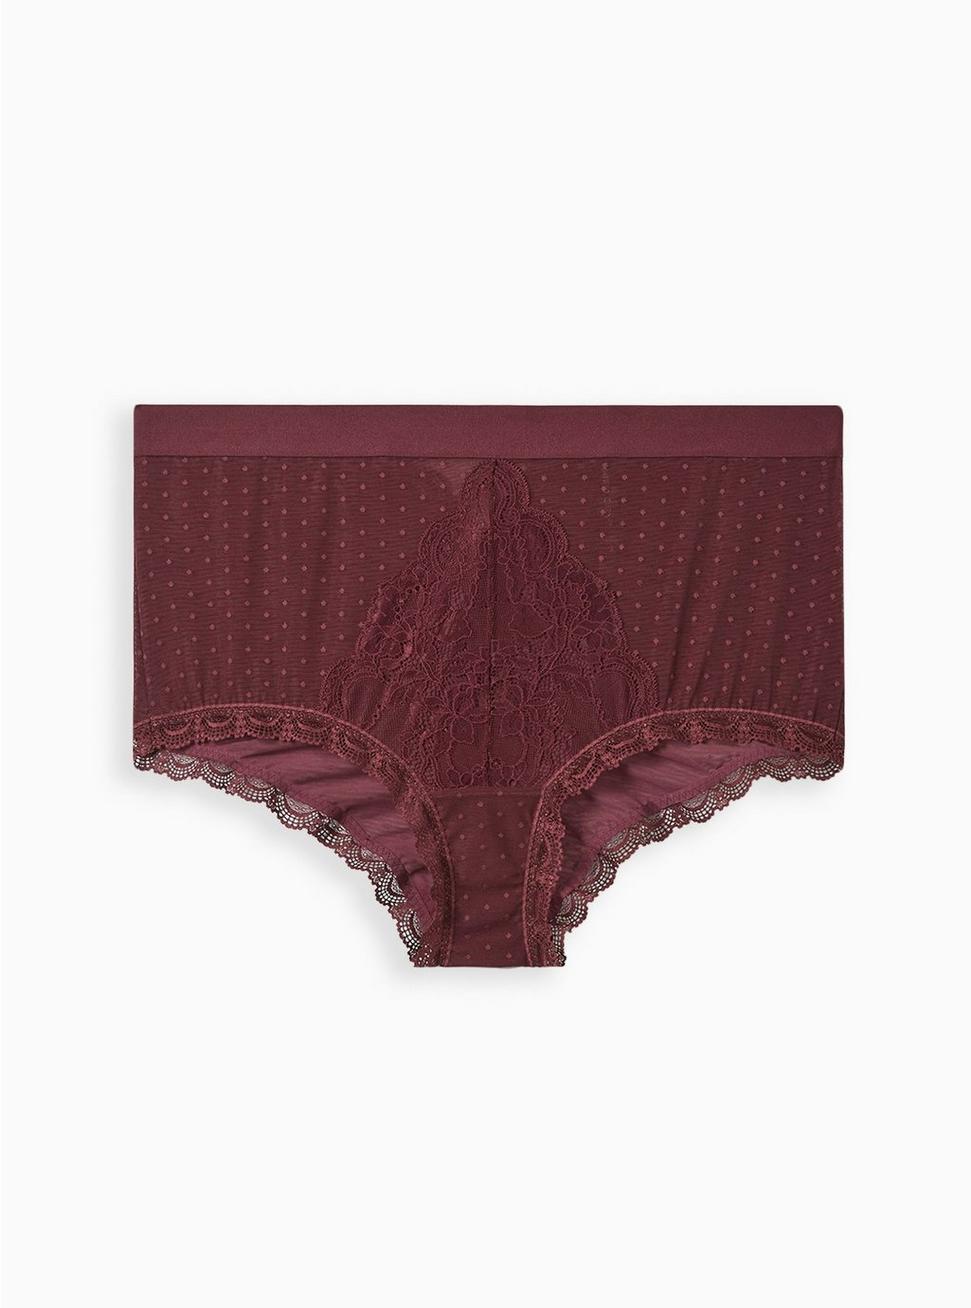 Dot and Lace Brief Panty with Keyhole Back, WINETASTING, hi-res